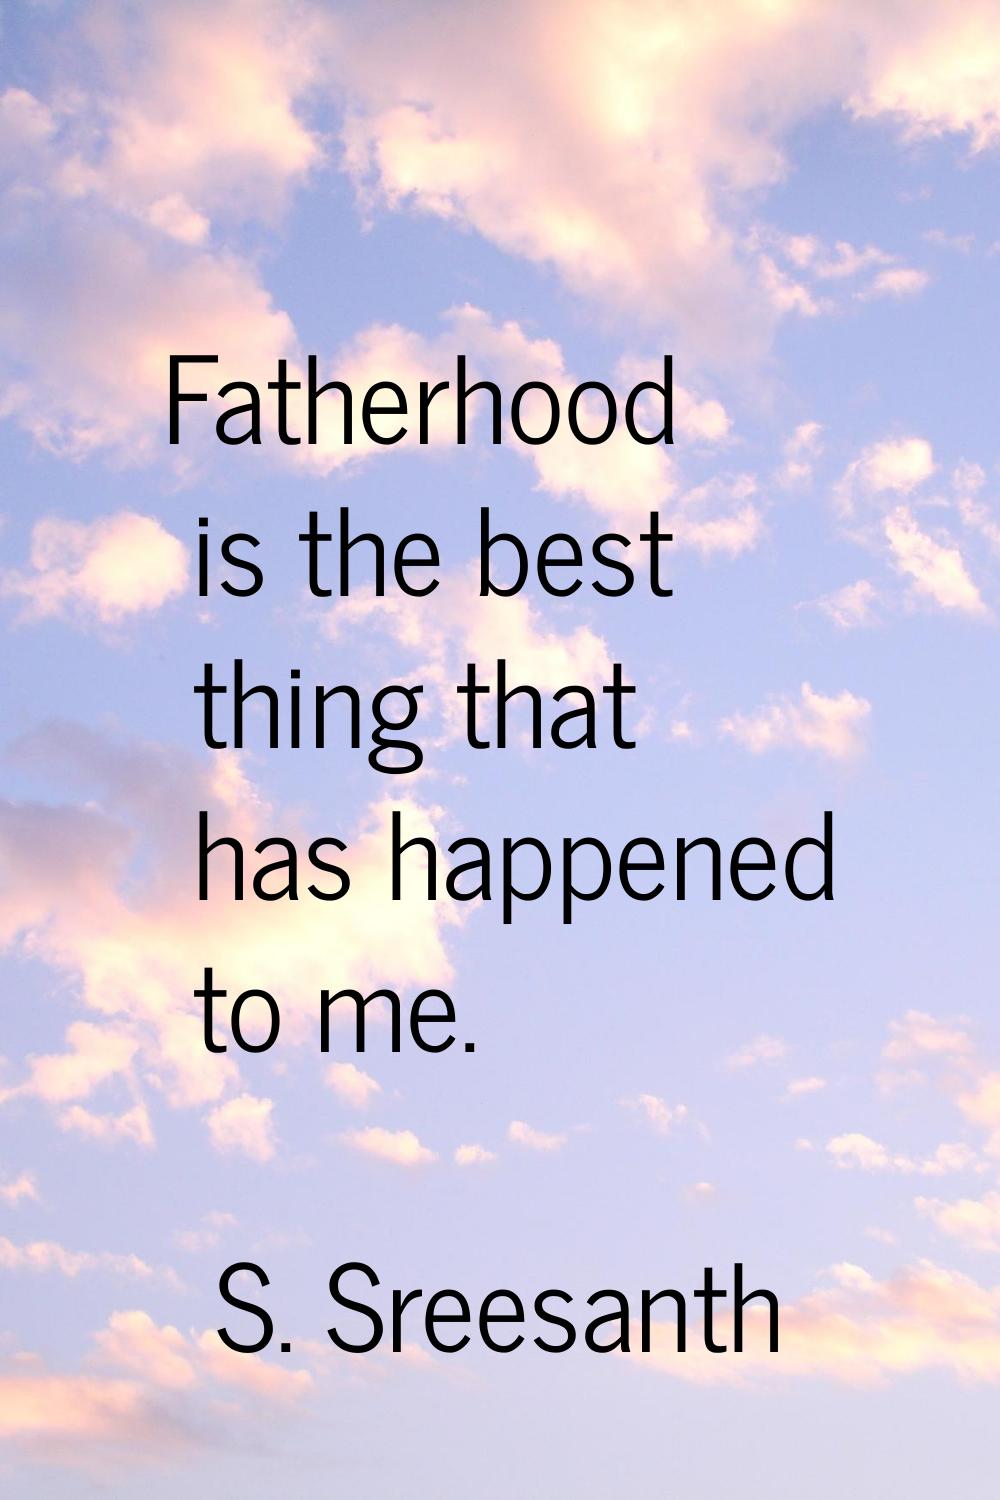 Fatherhood is the best thing that has happened to me.